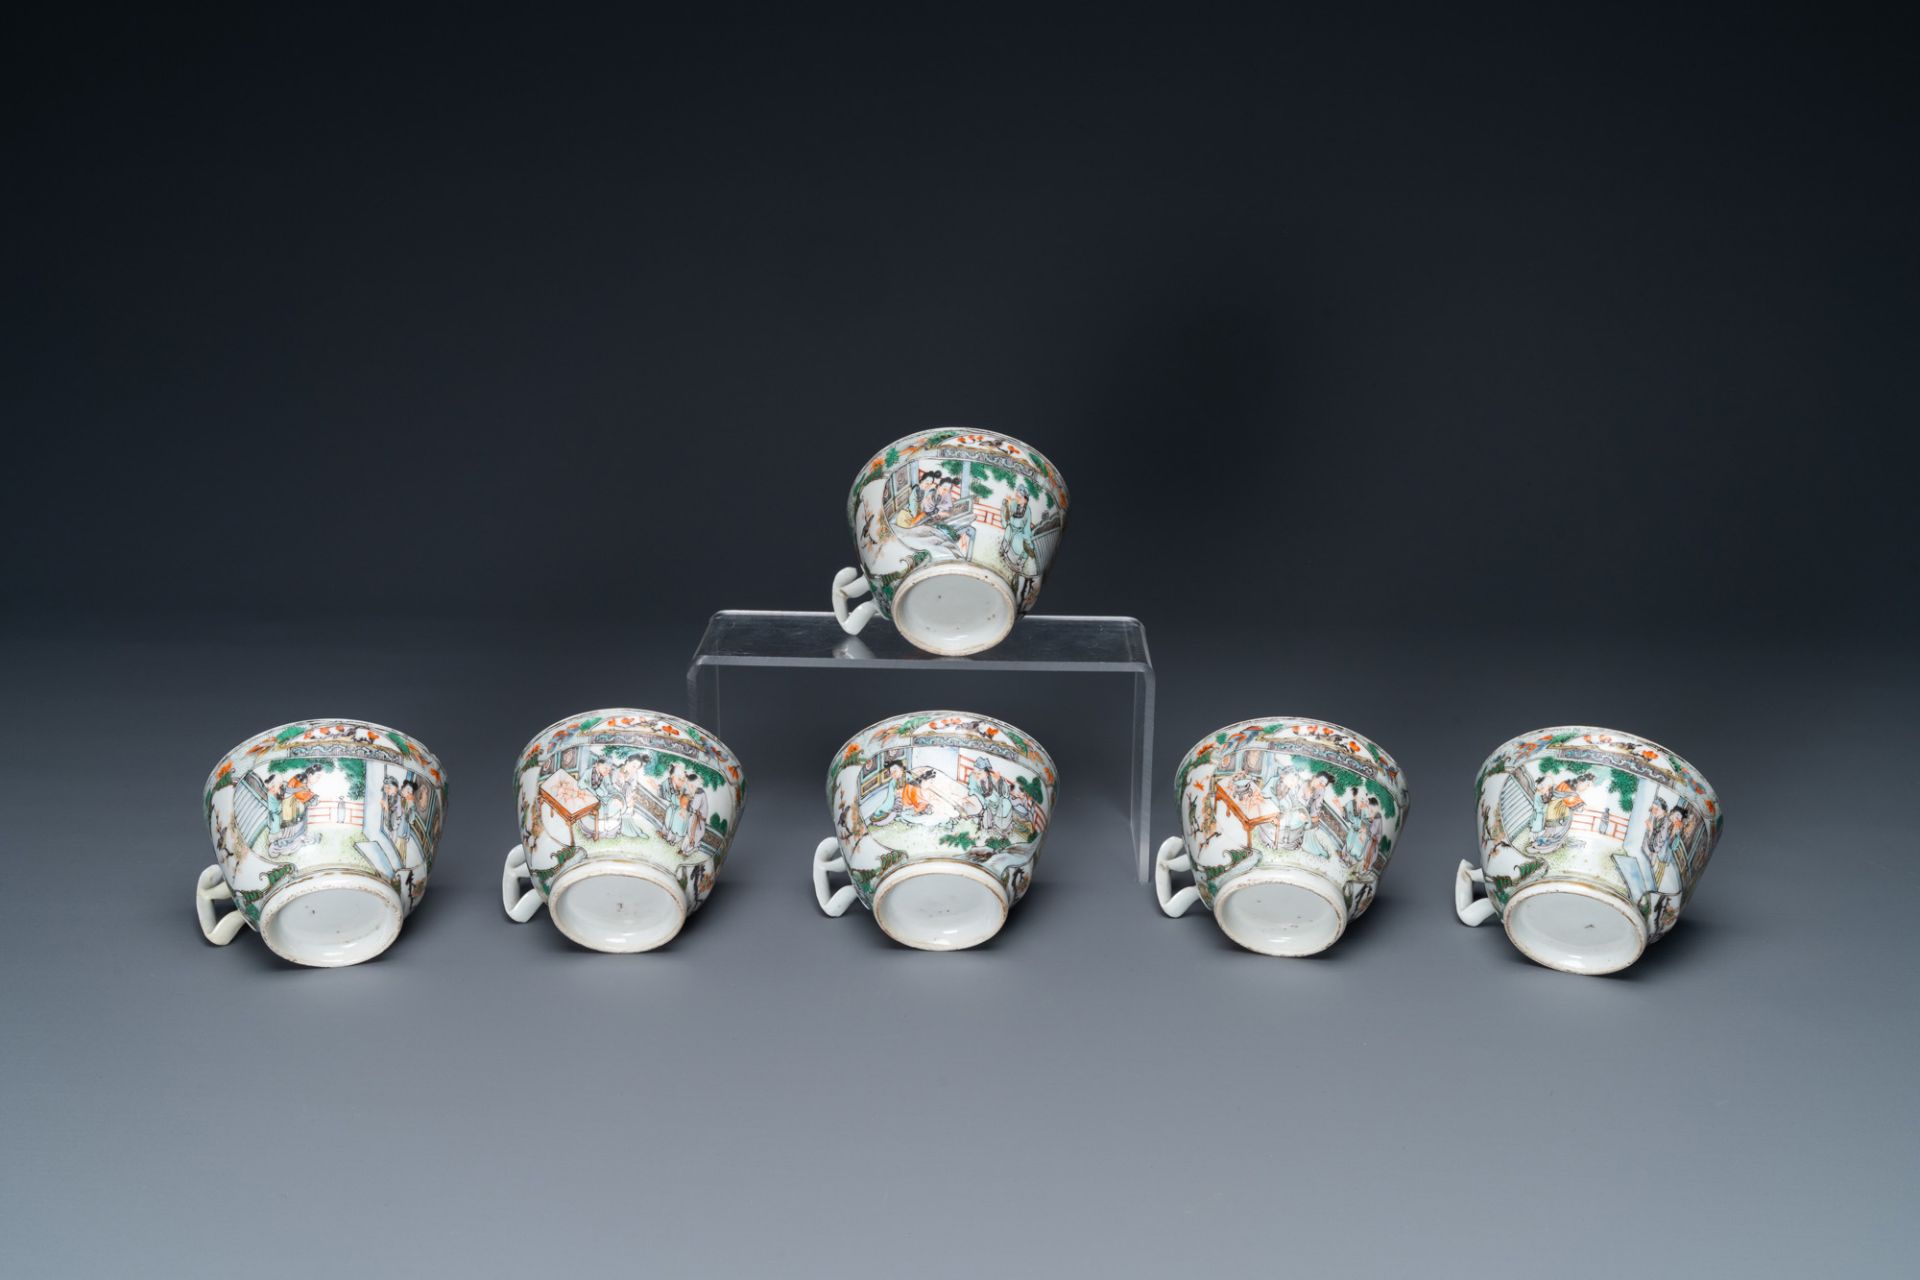 A Chinese Canton famille verte 14-piece tea service in presentation box, 19th C. - Image 15 of 23